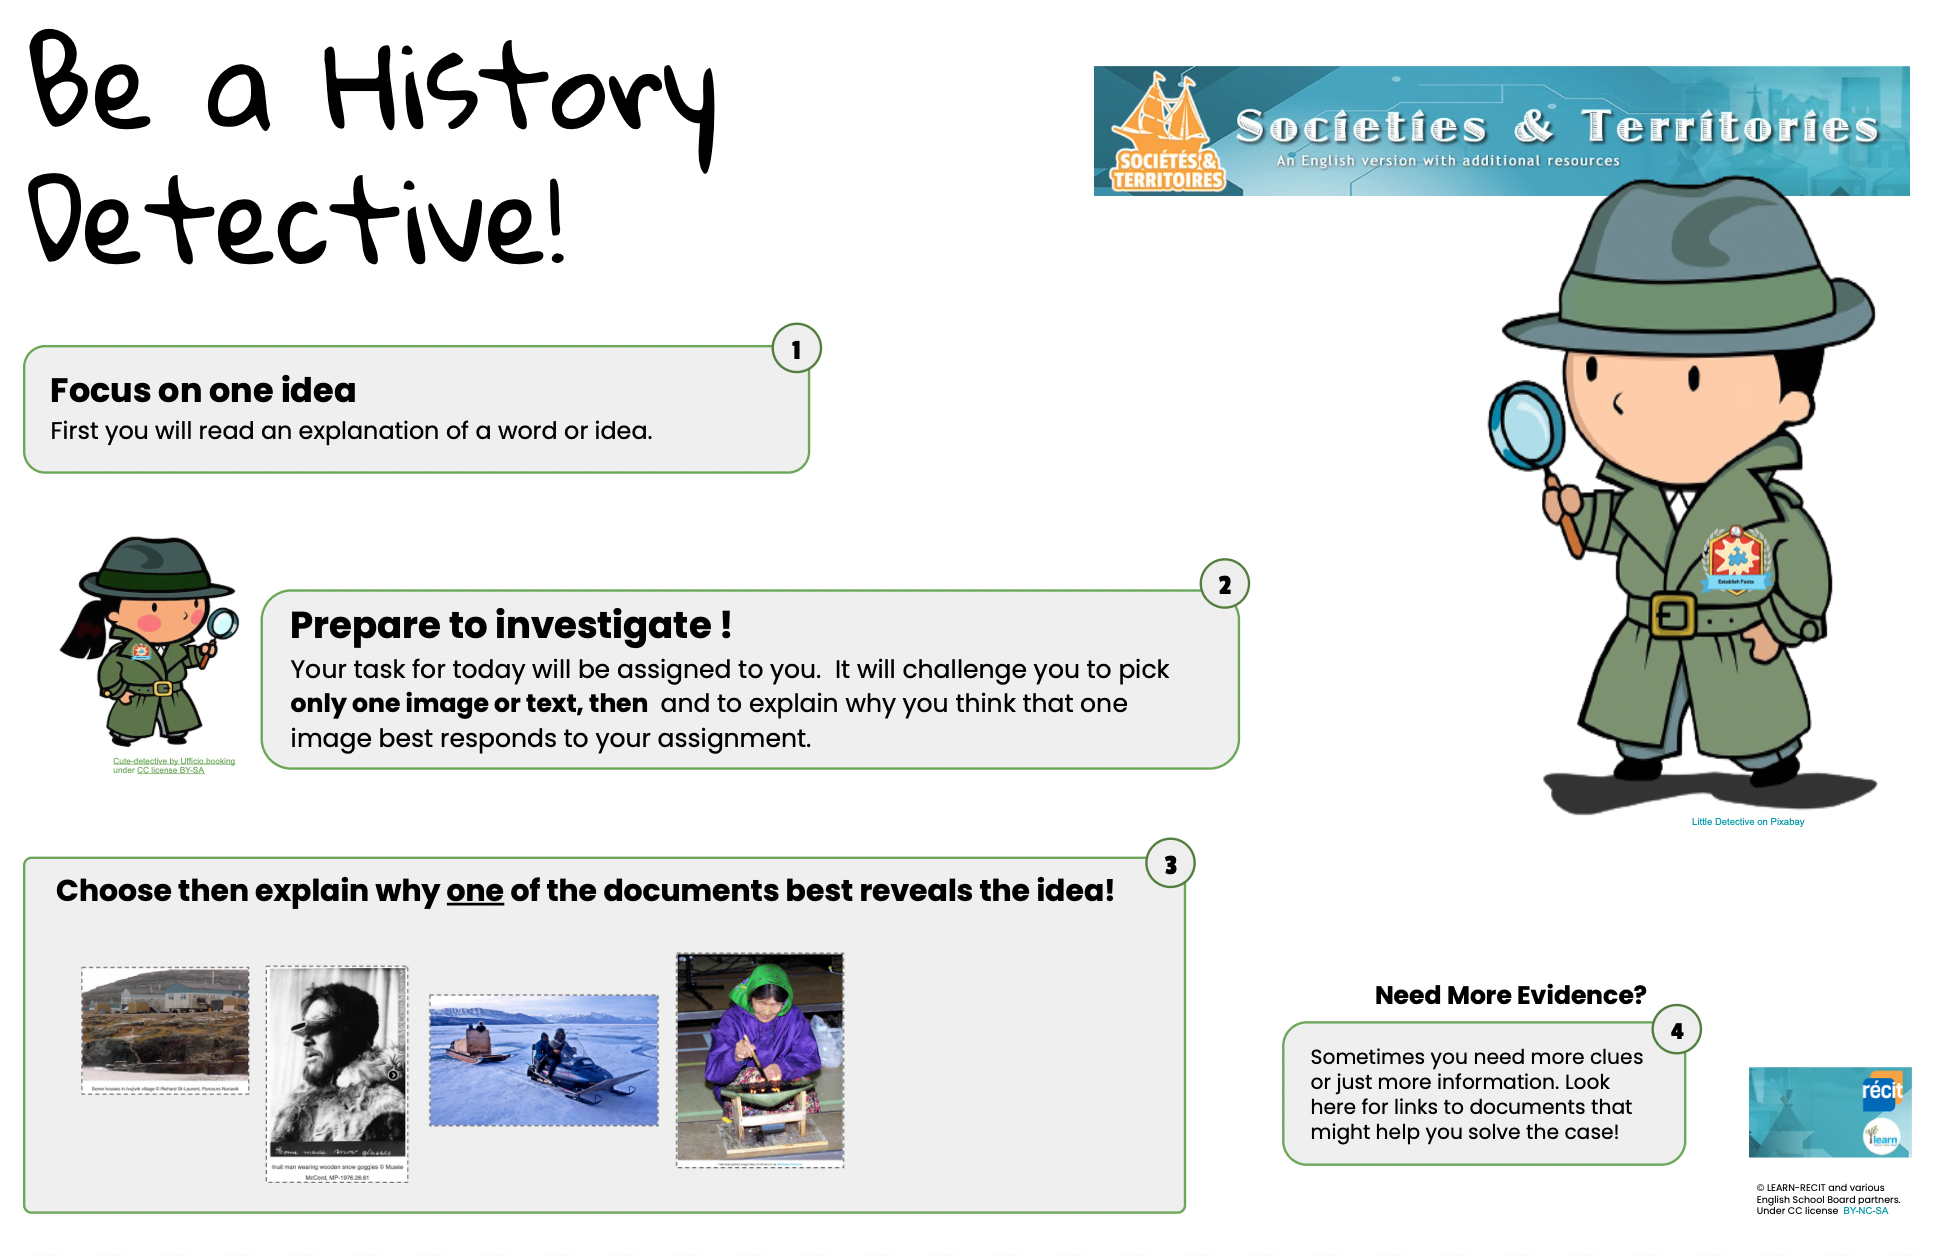 Be a History Detective!  Image Investigations for Inuit 1980+